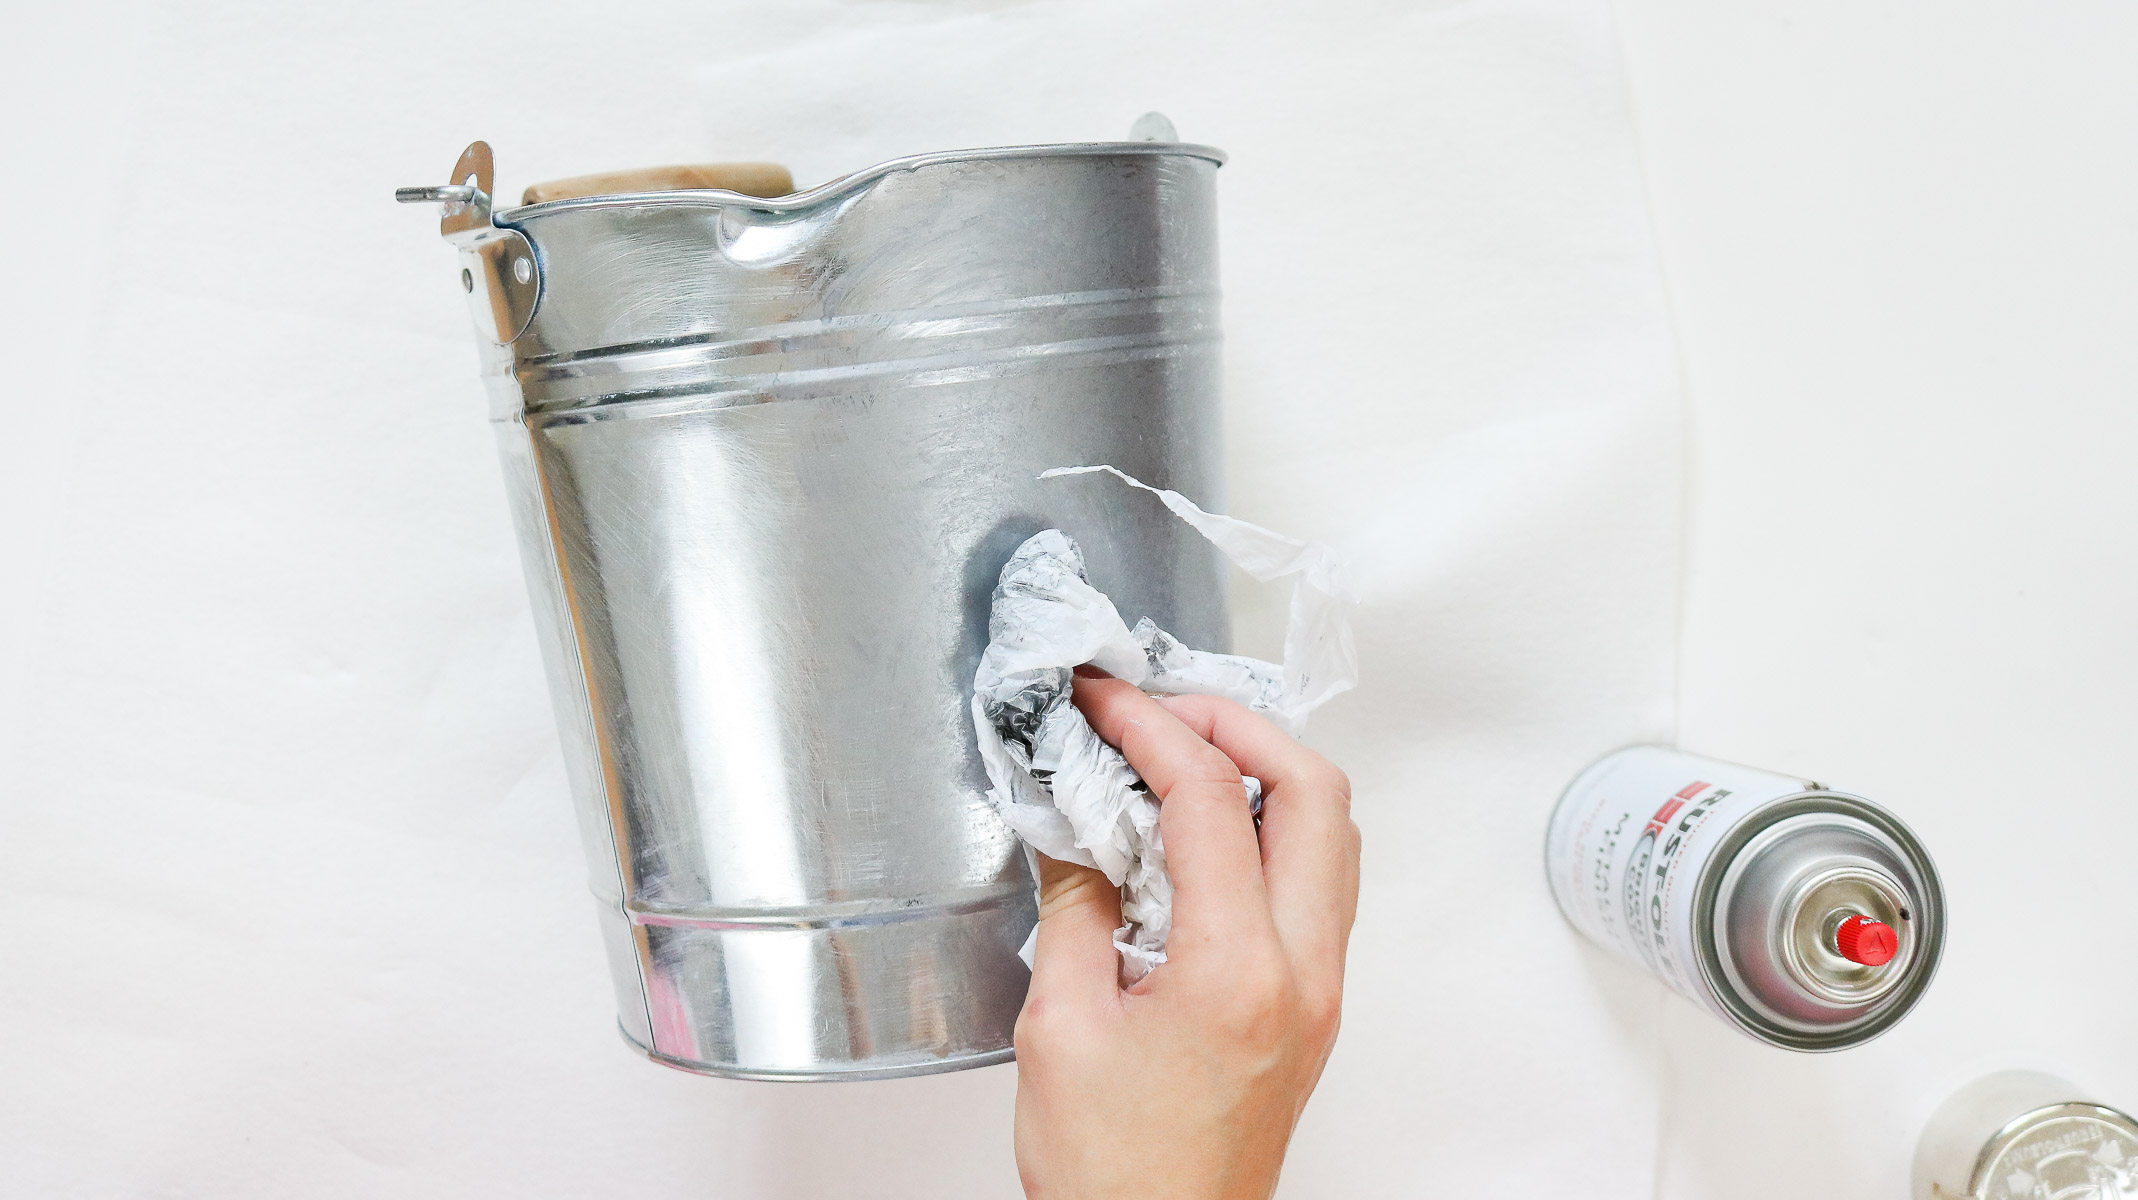 How to Paint Galvanized Metal